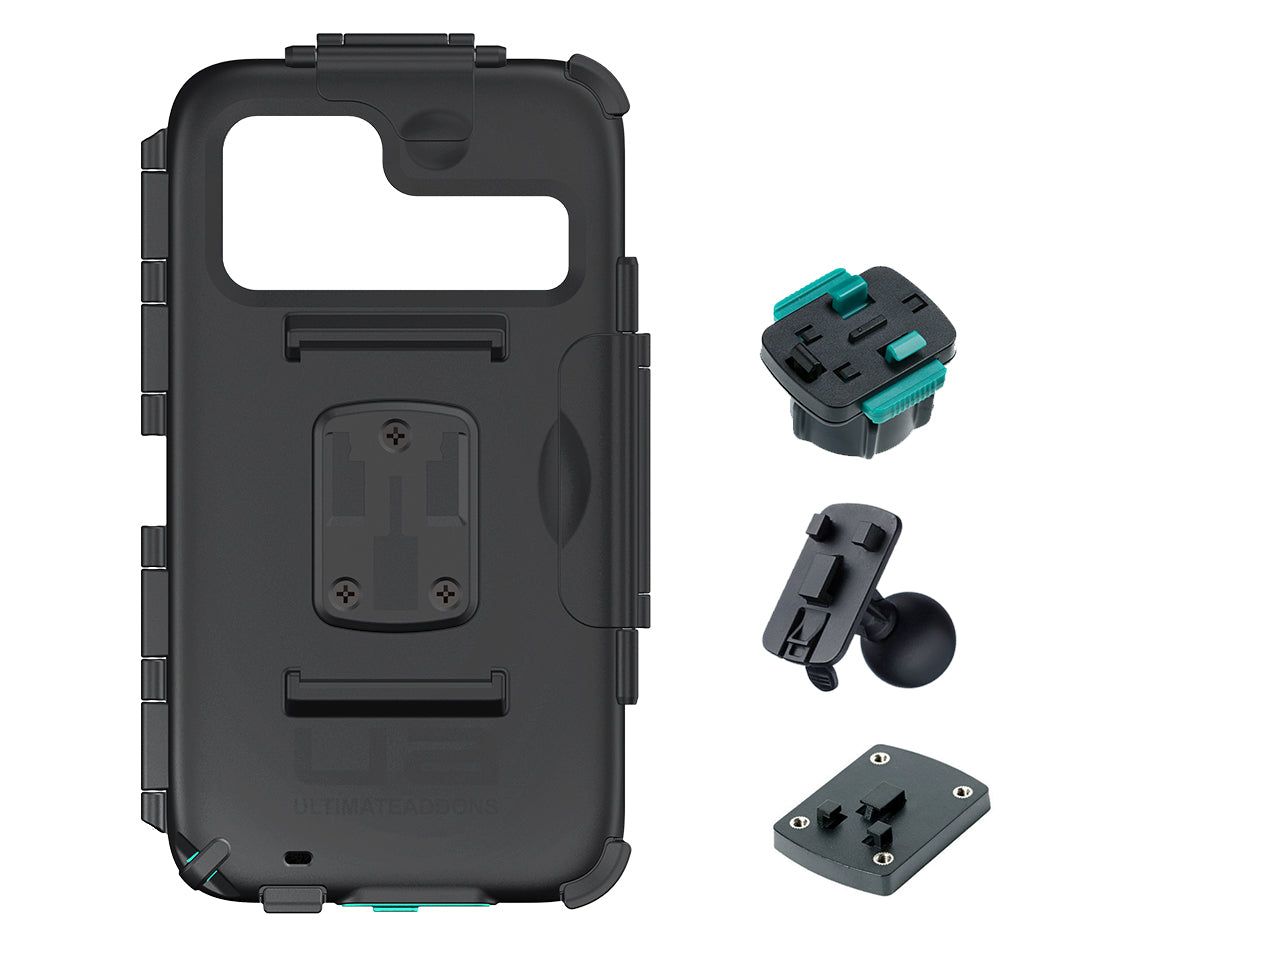 Ultimateaddons Samsung Galaxy S10 / S10+ Case and Adapter Kit